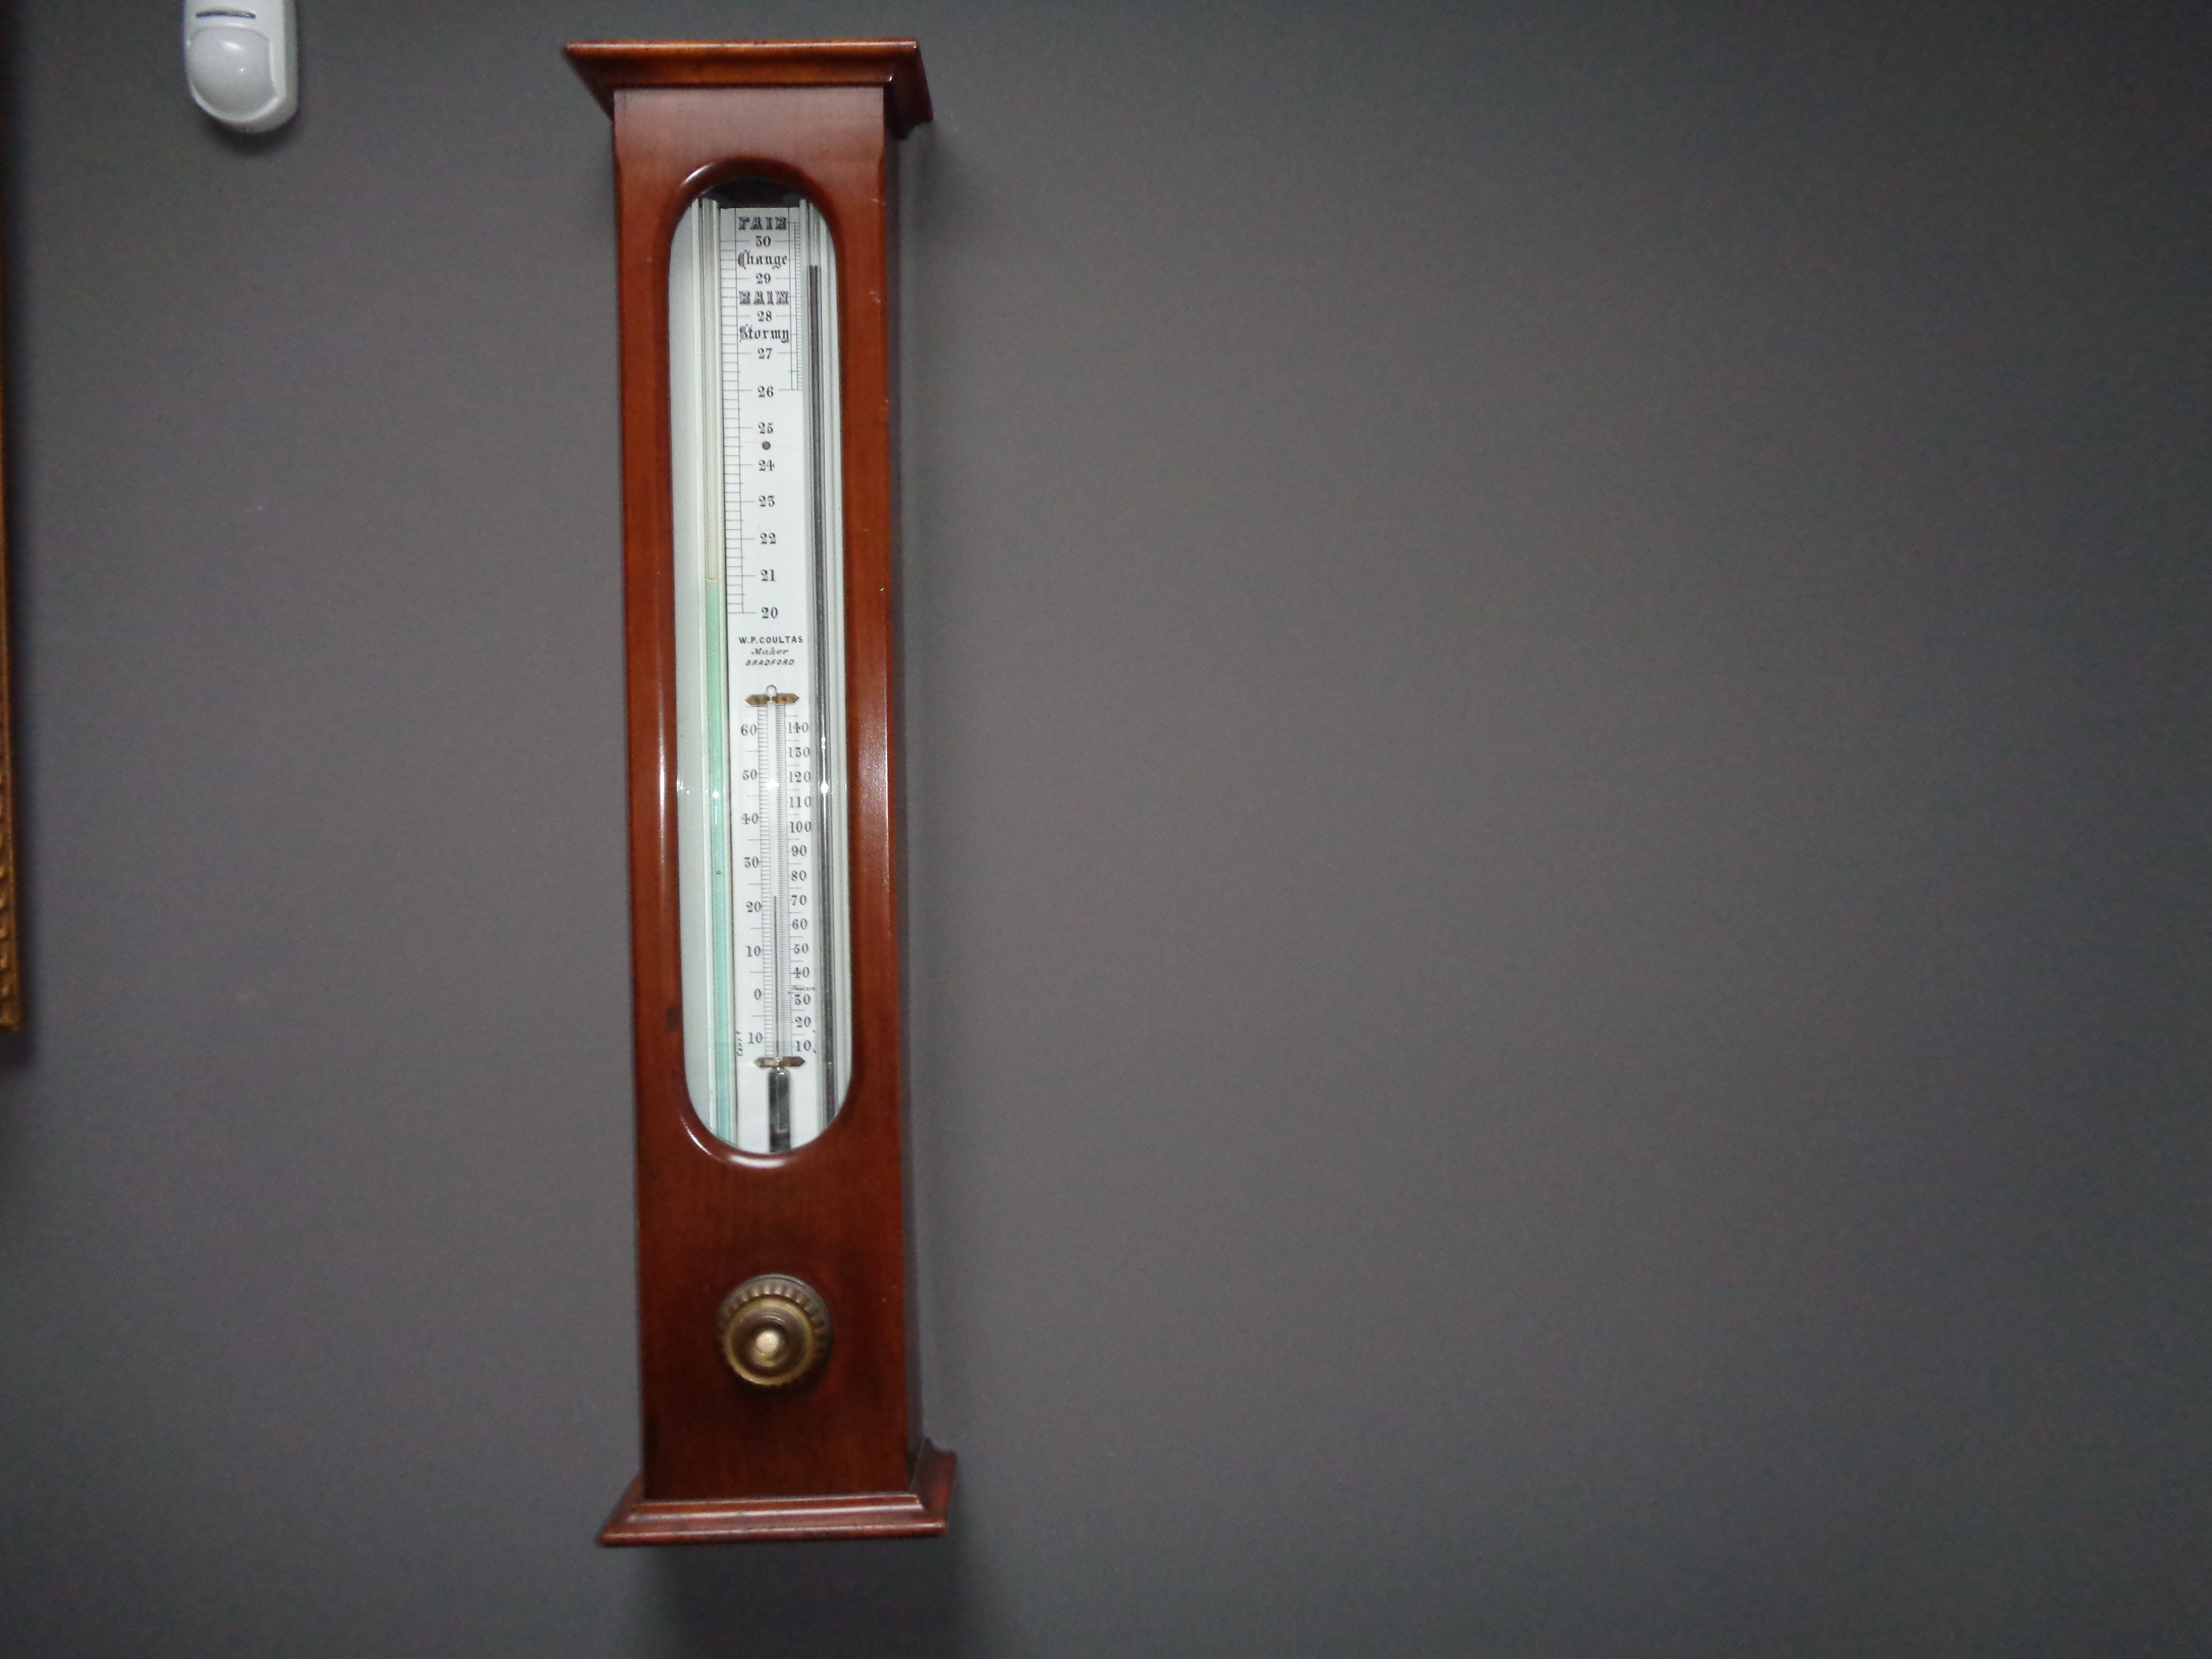 An extremely rare barometer ca 1880